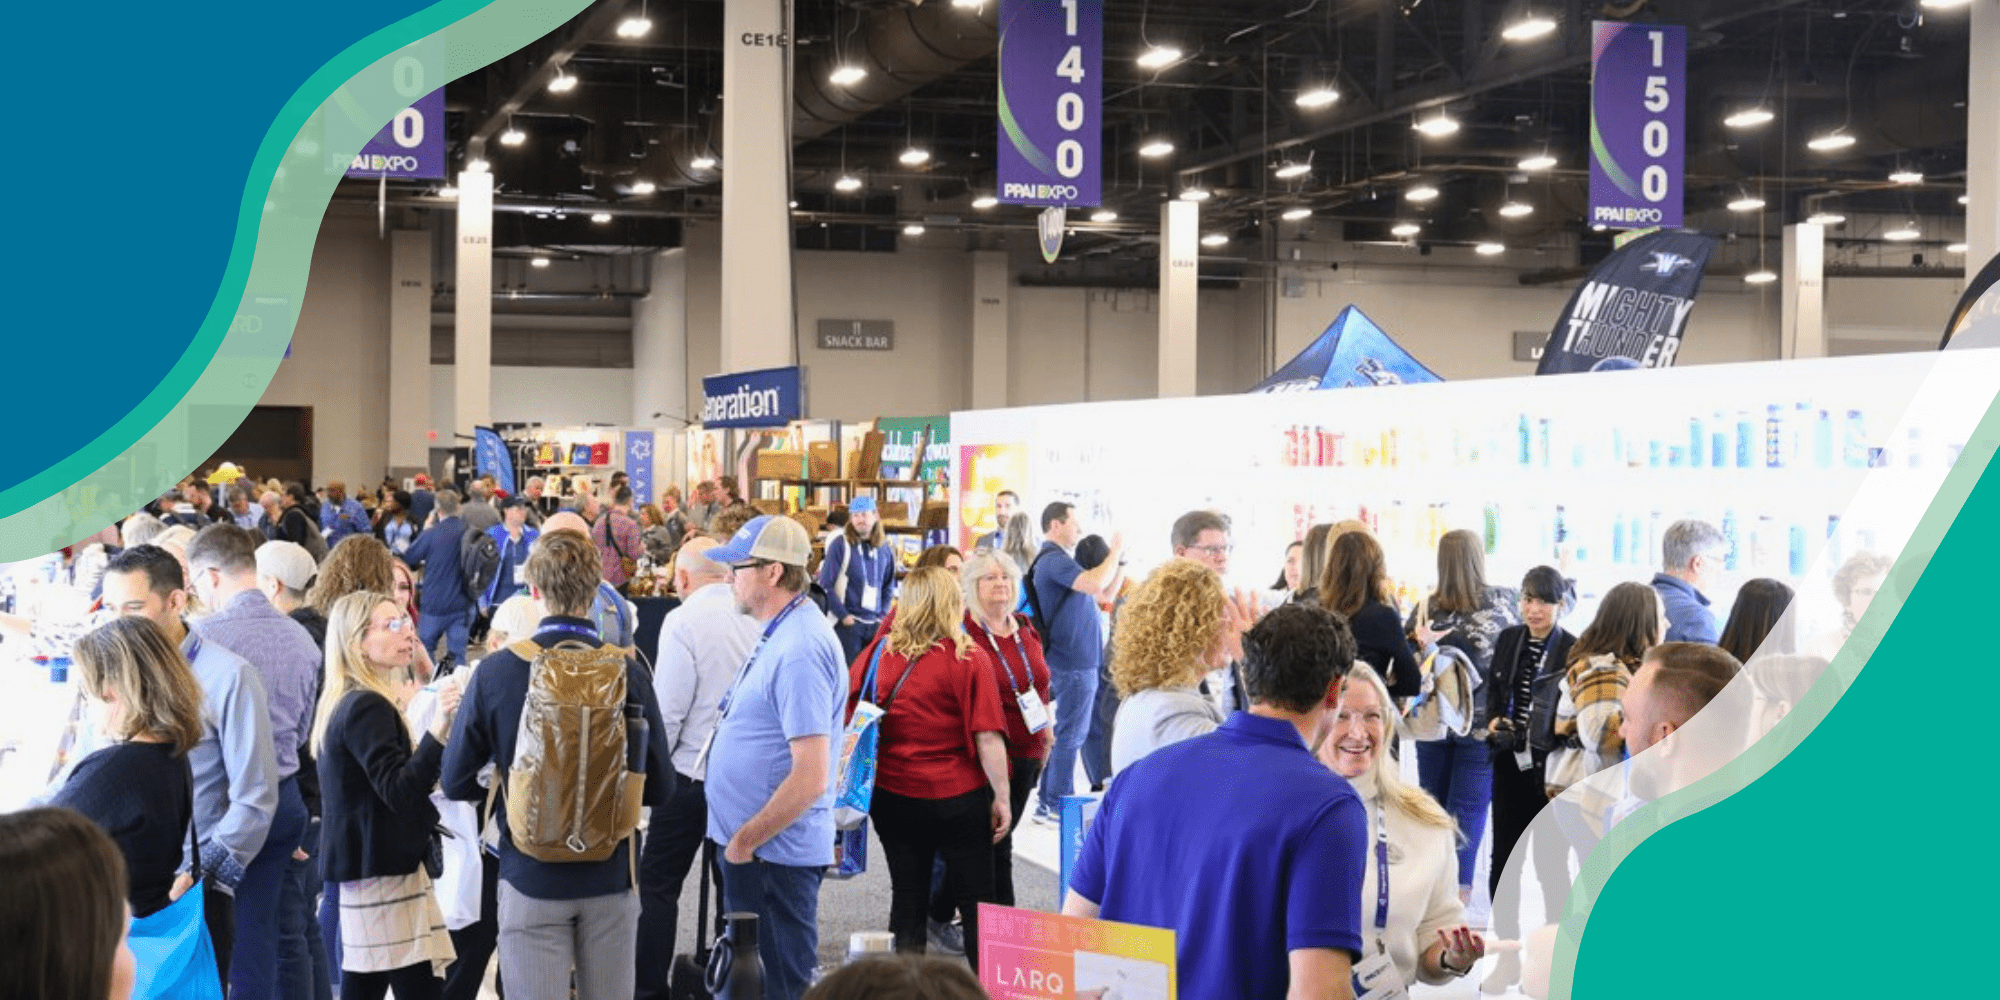 A Trade show featuring multiple looking at promotional merchandise and giveaways